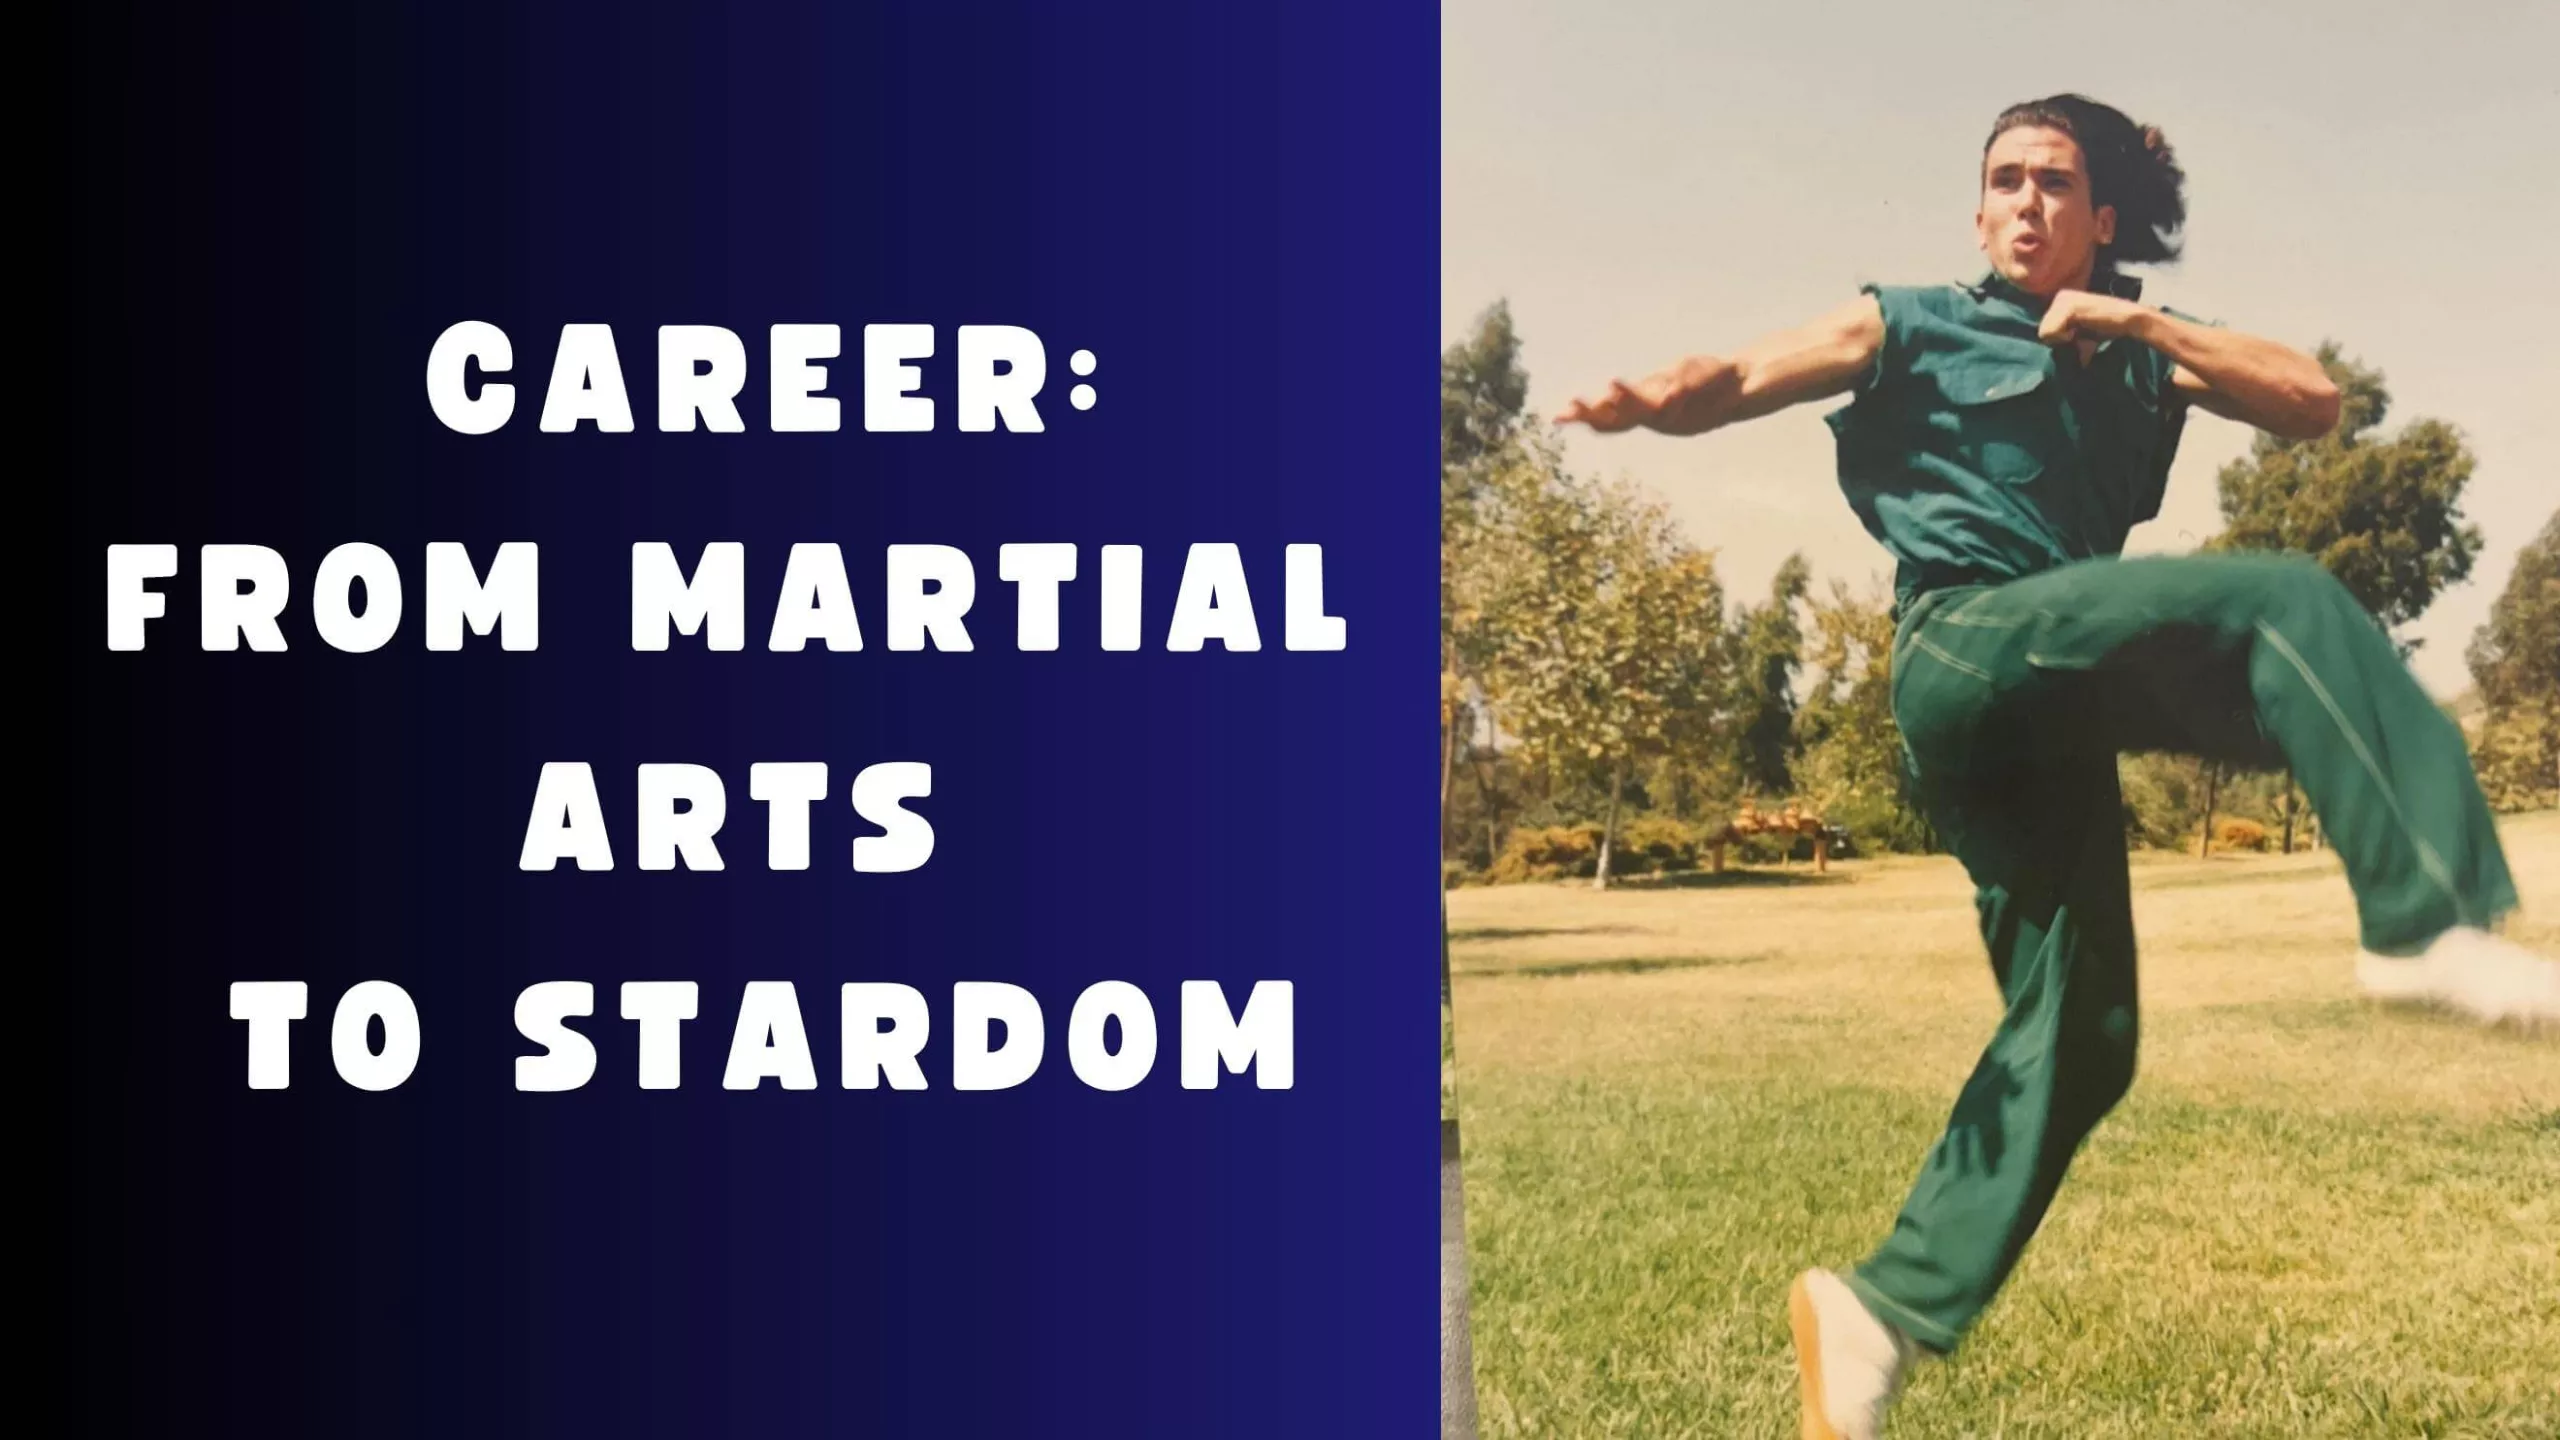 Career: From Martial Arts to Stardom